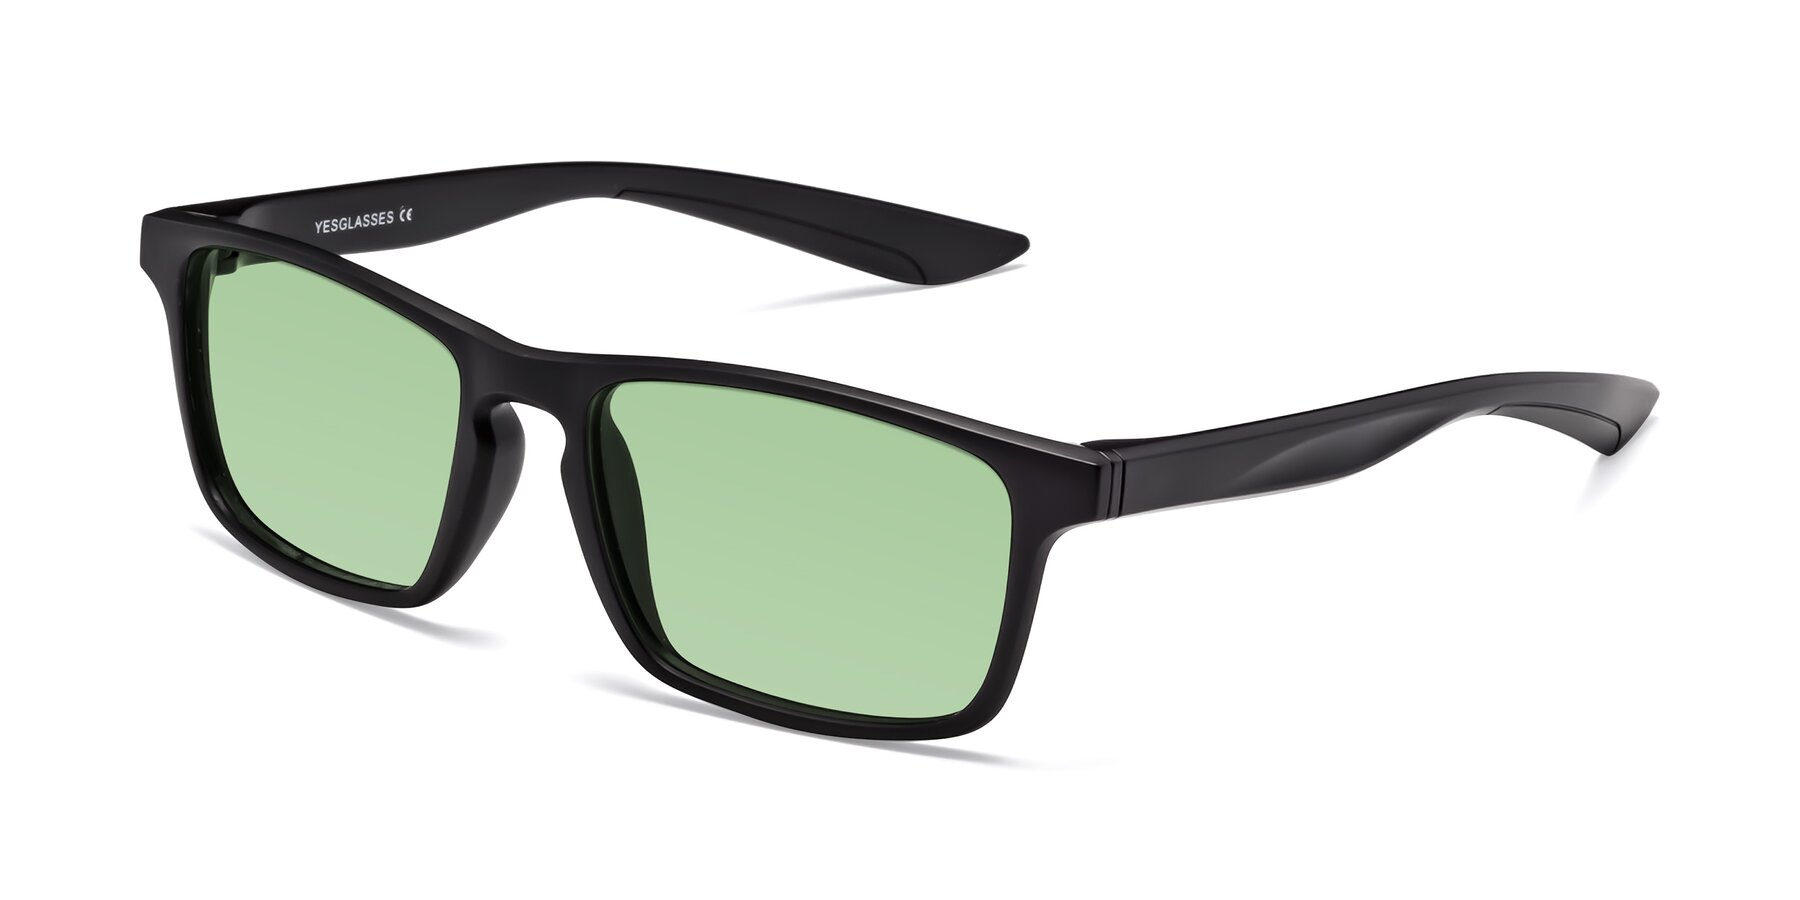 Angle of Passion in Matte Black with Medium Green Tinted Lenses